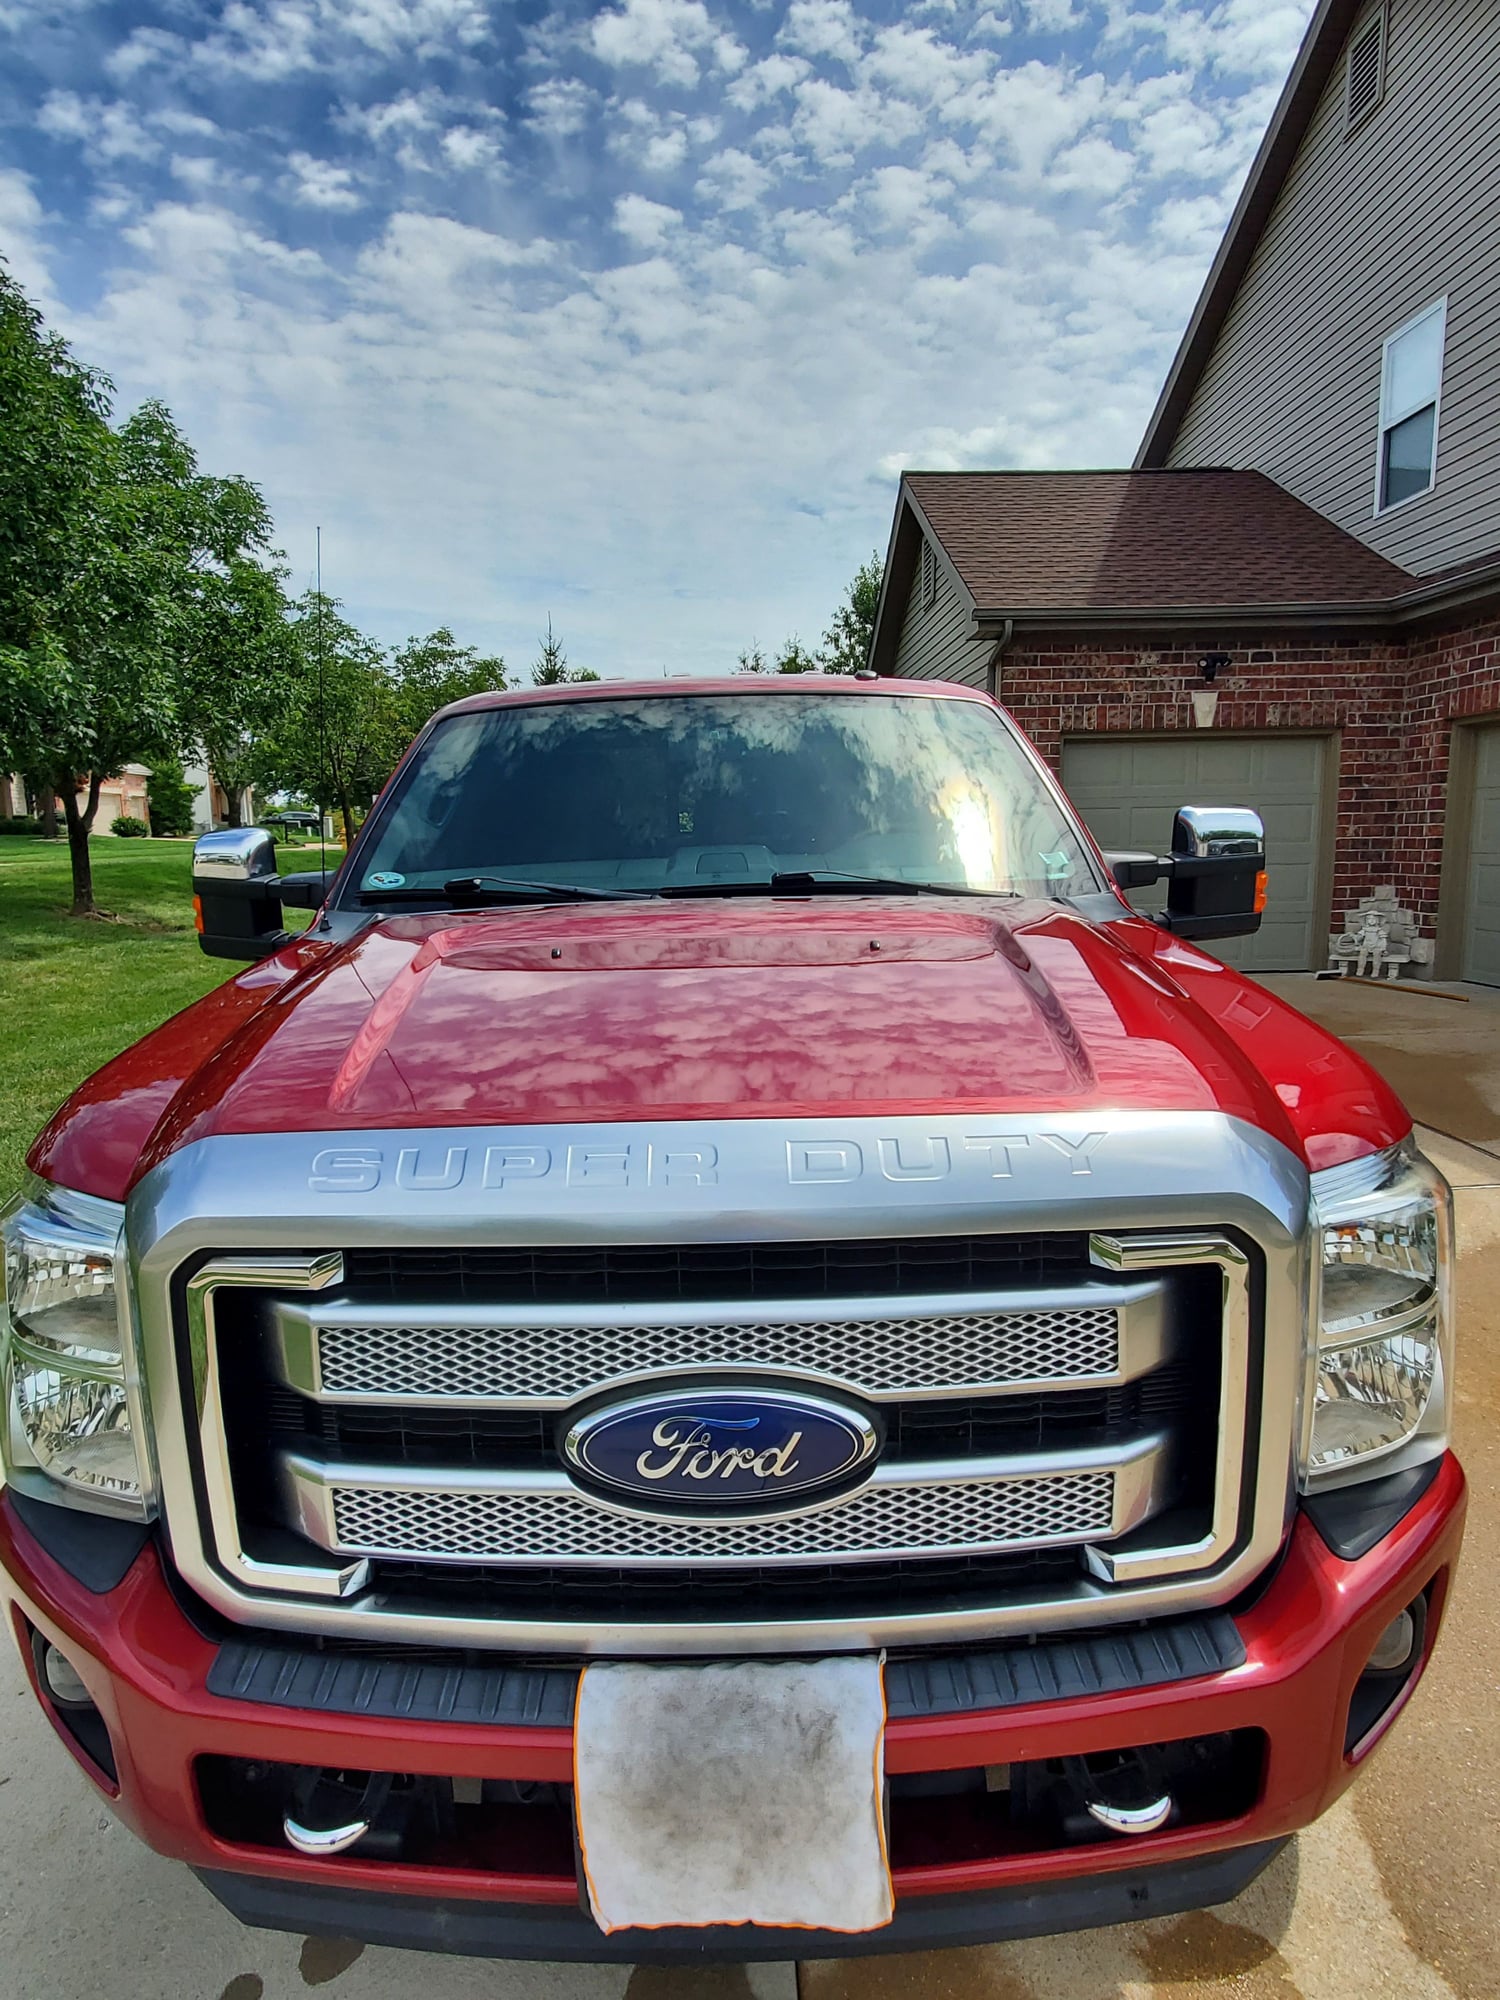 2015 Ford F-250 Super Duty - 2015 Ford F250 (F-250) Platinum Diesel - Used - VIN 1FT7W2BT5FED36450 - 127,500 Miles - 8 cyl - 4WD - Automatic - Truck - Red - Saint Louis, MO 63129, United States